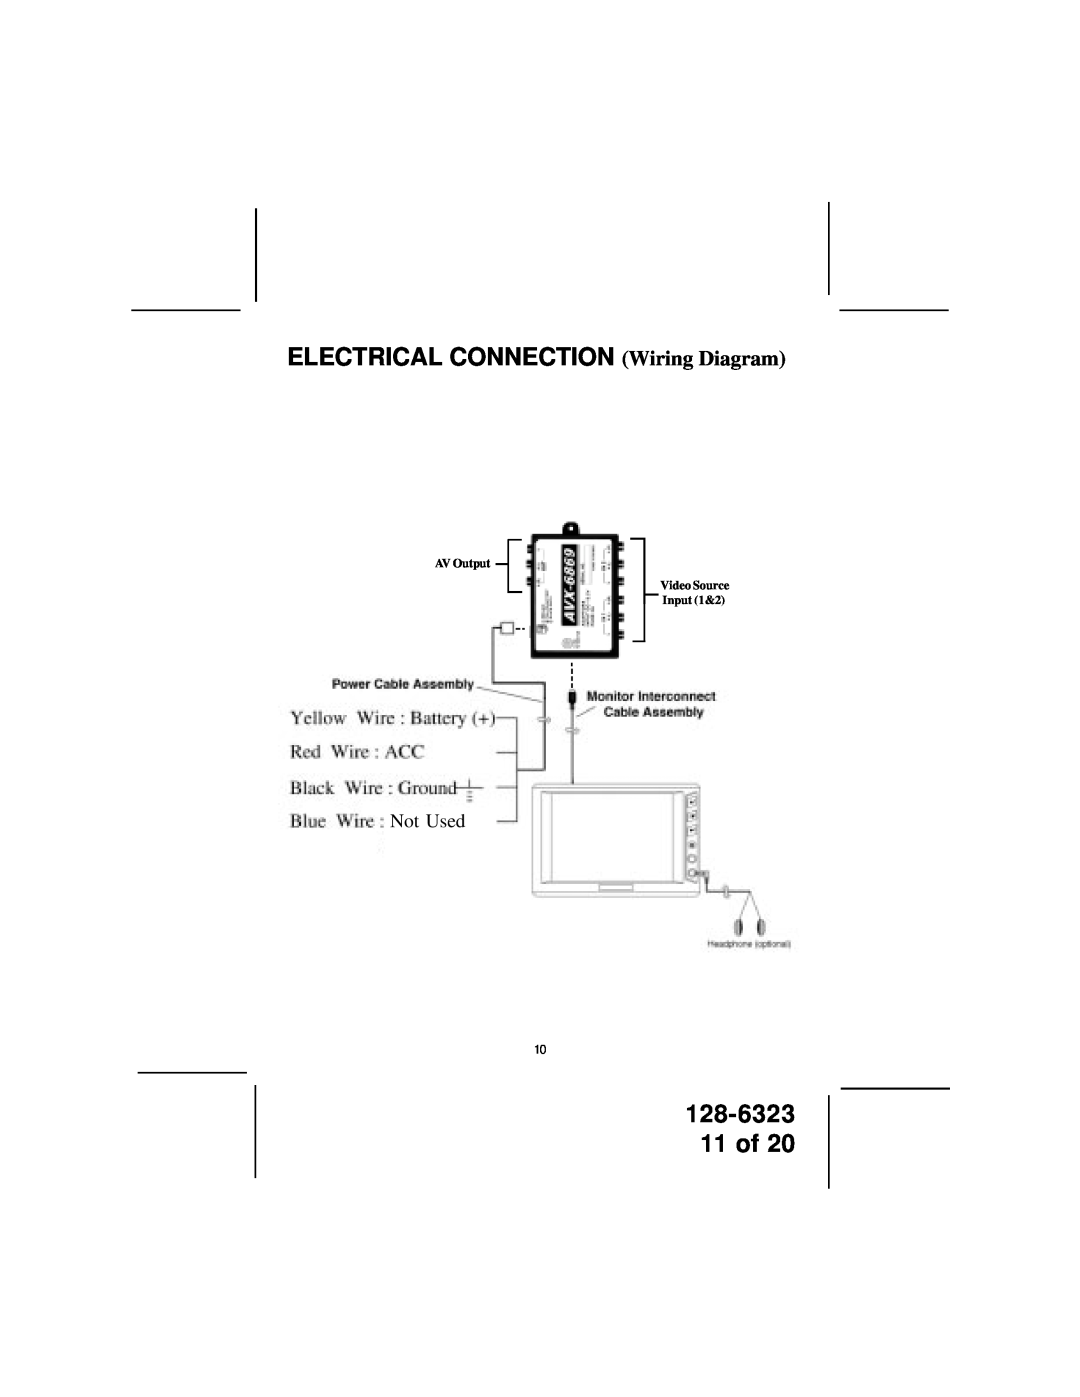 Audiovox LCM5043NP ELECTRICAL CONNECTION Wiring Diagram, 128-6323 11 of, Not Used, AV Output Video Source Input 1&2 